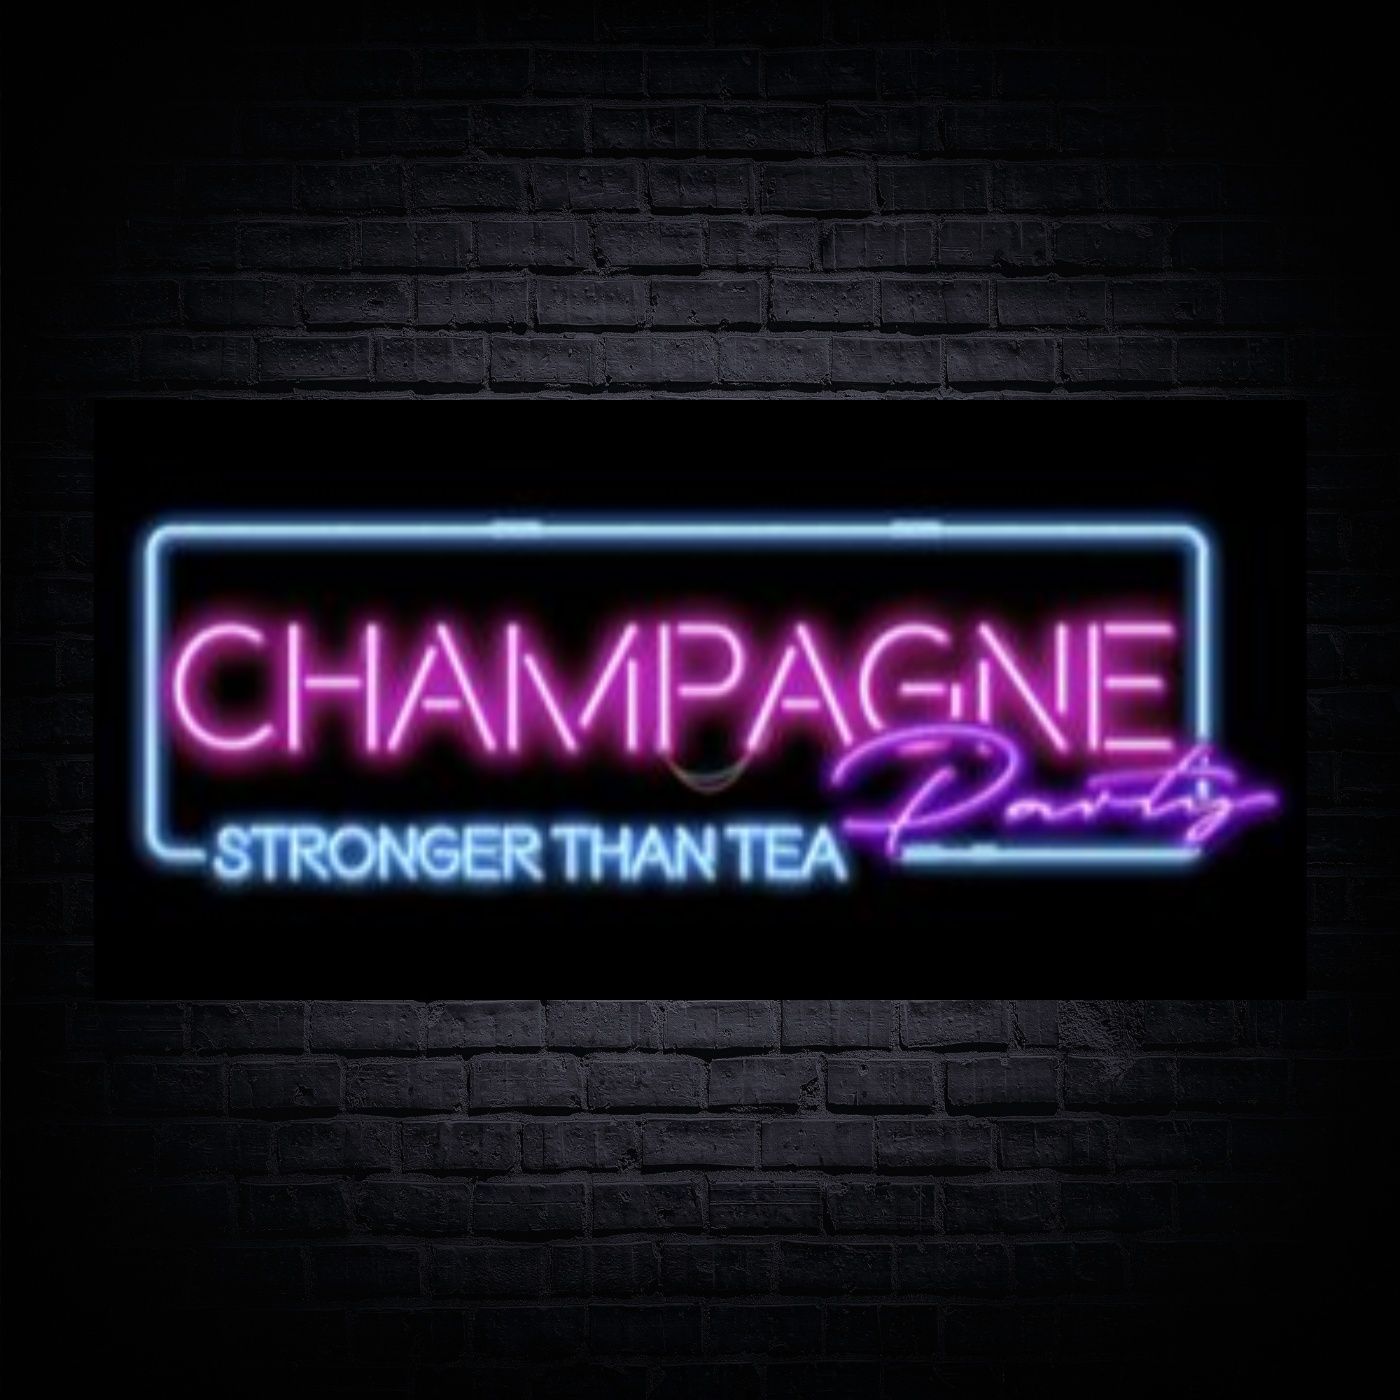 Champagne Party!! Stronger Than Tea